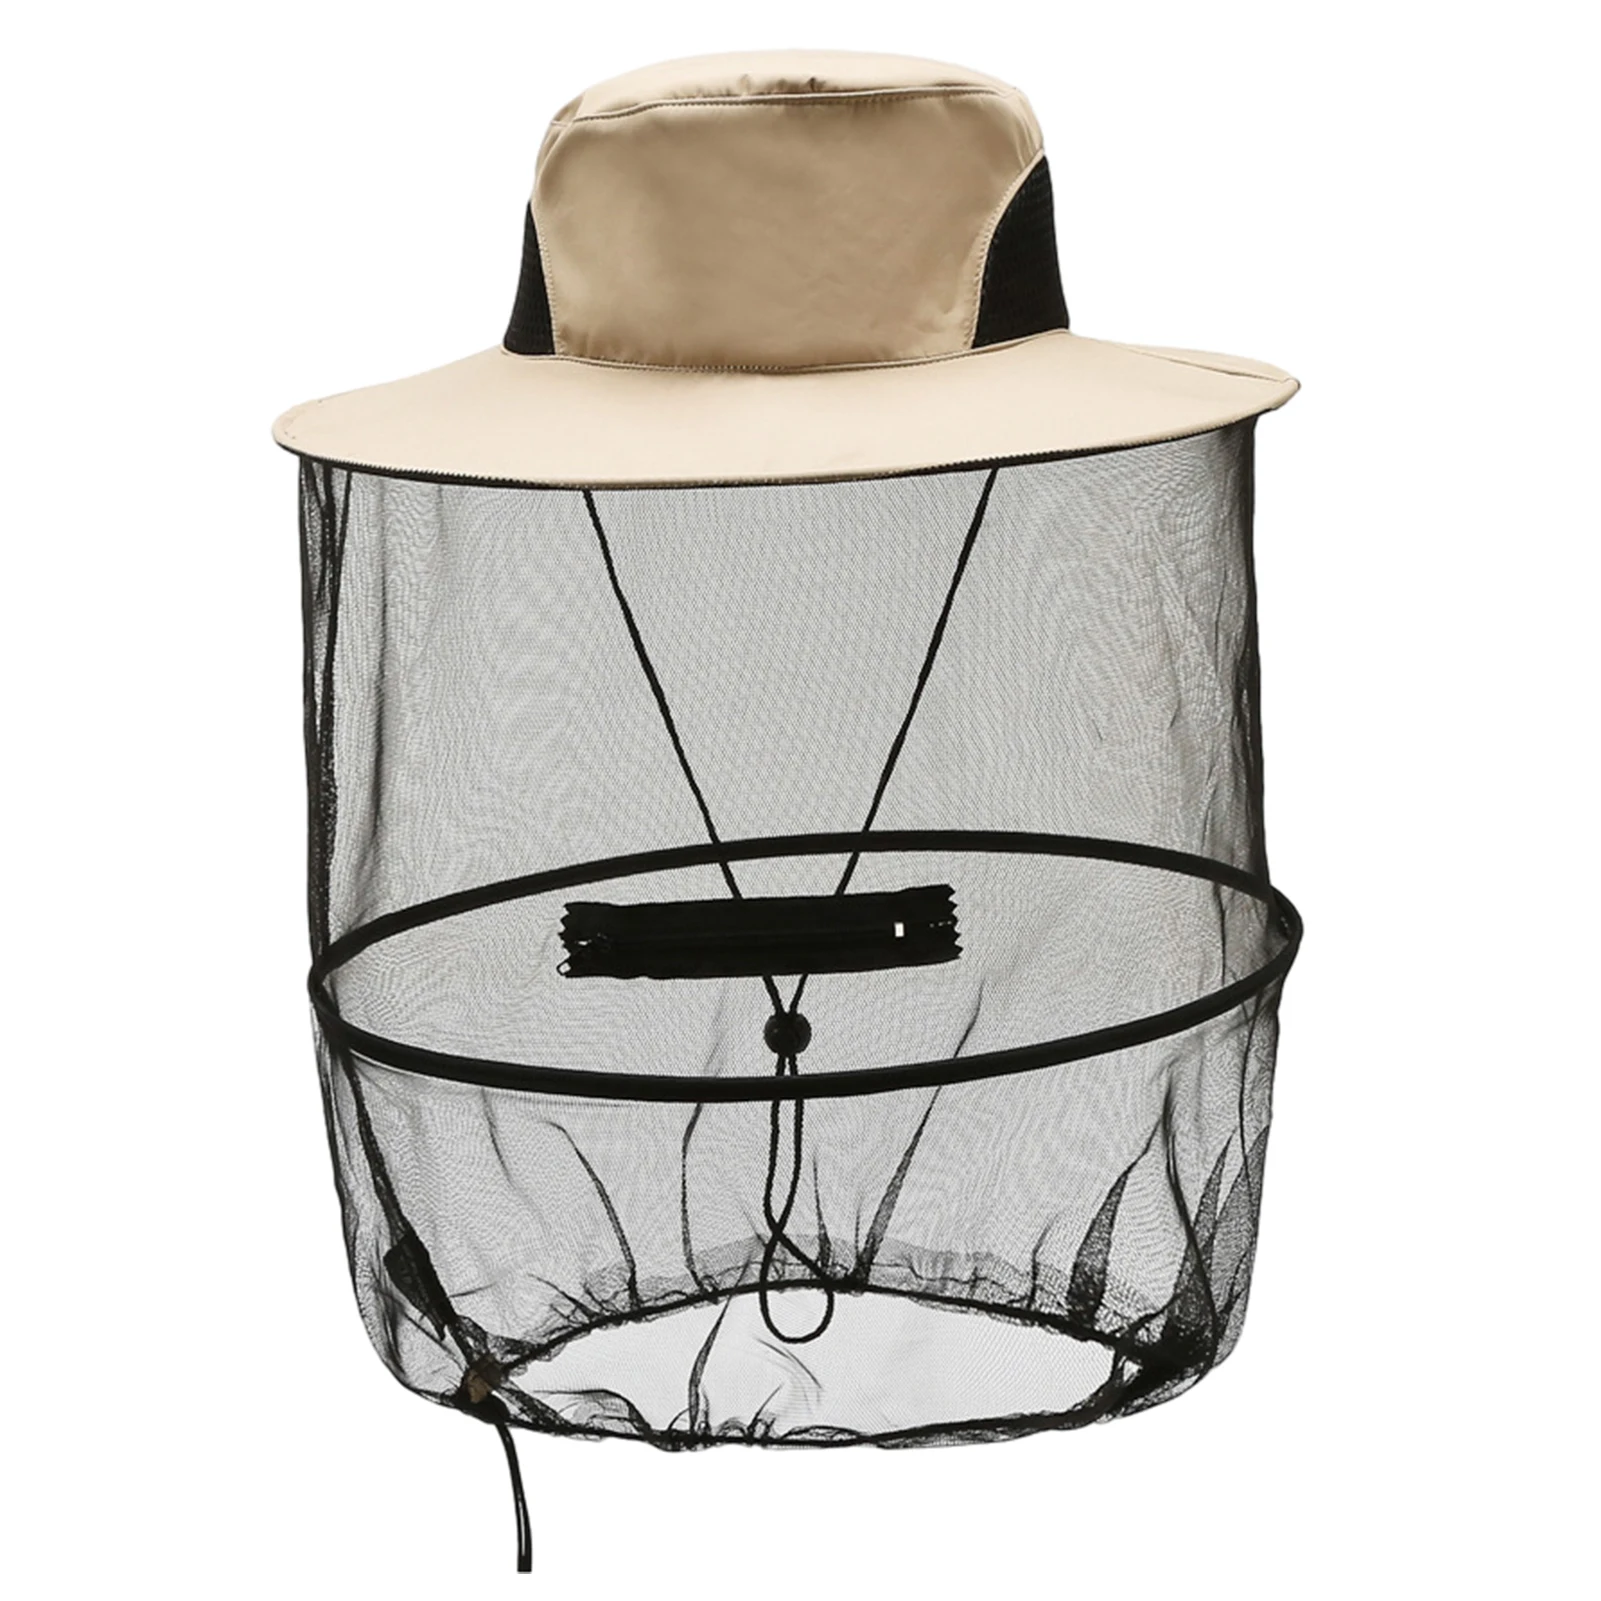 

With Netting Bucket Cap Gardening Mosquito Fine Mesh Adjustable Strap Facial Protector Bee Keeping Washable Camping Sun Hat